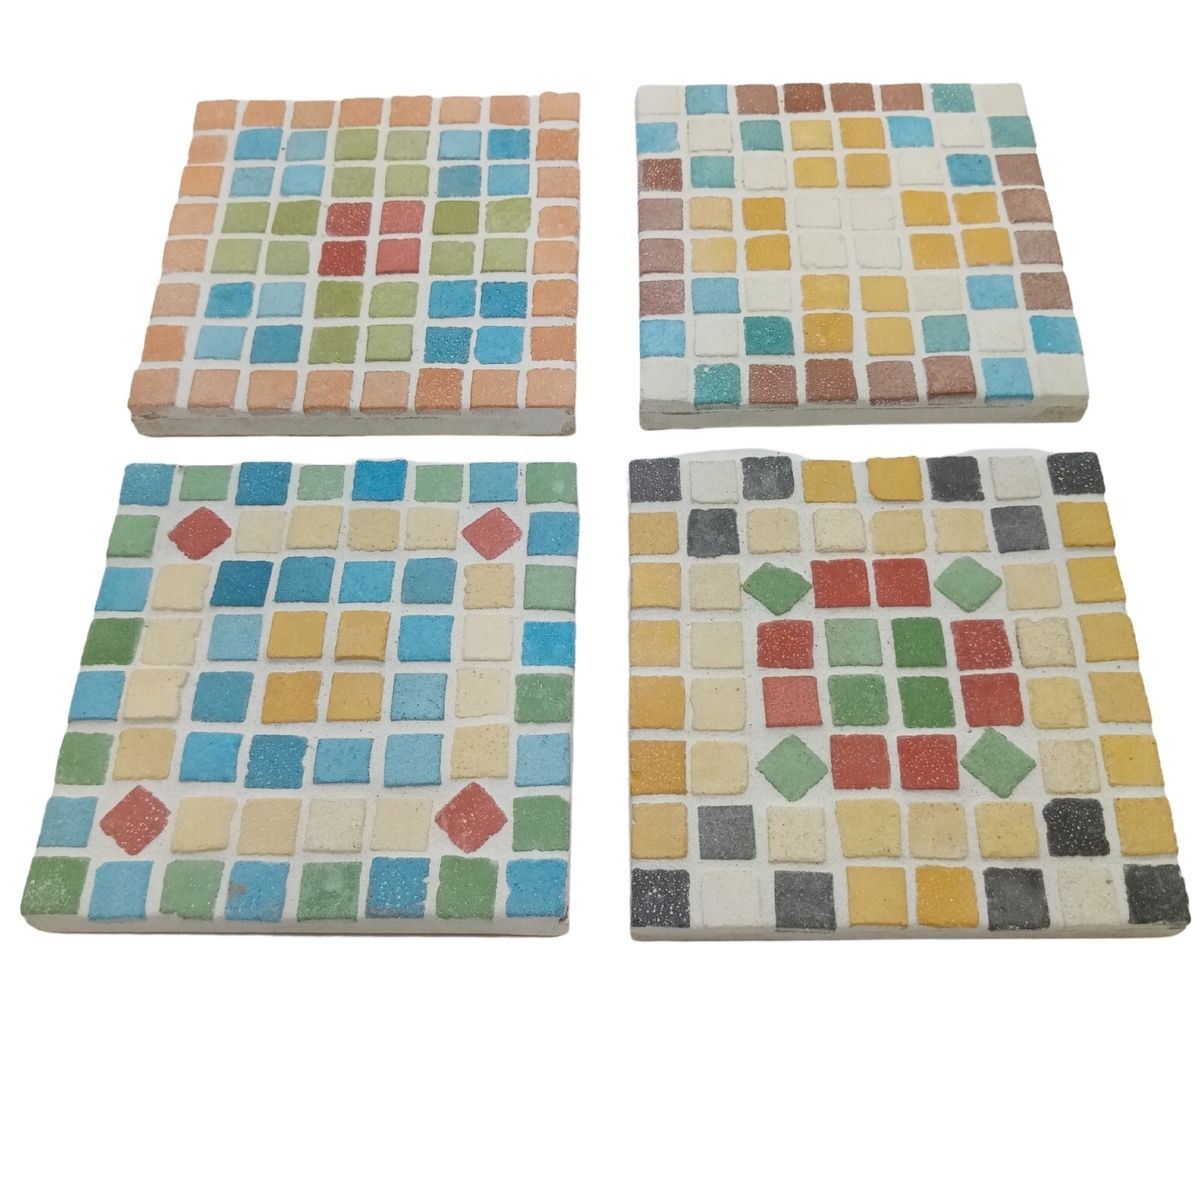 Base - Set of 4 Coasters - DISCONTINUED